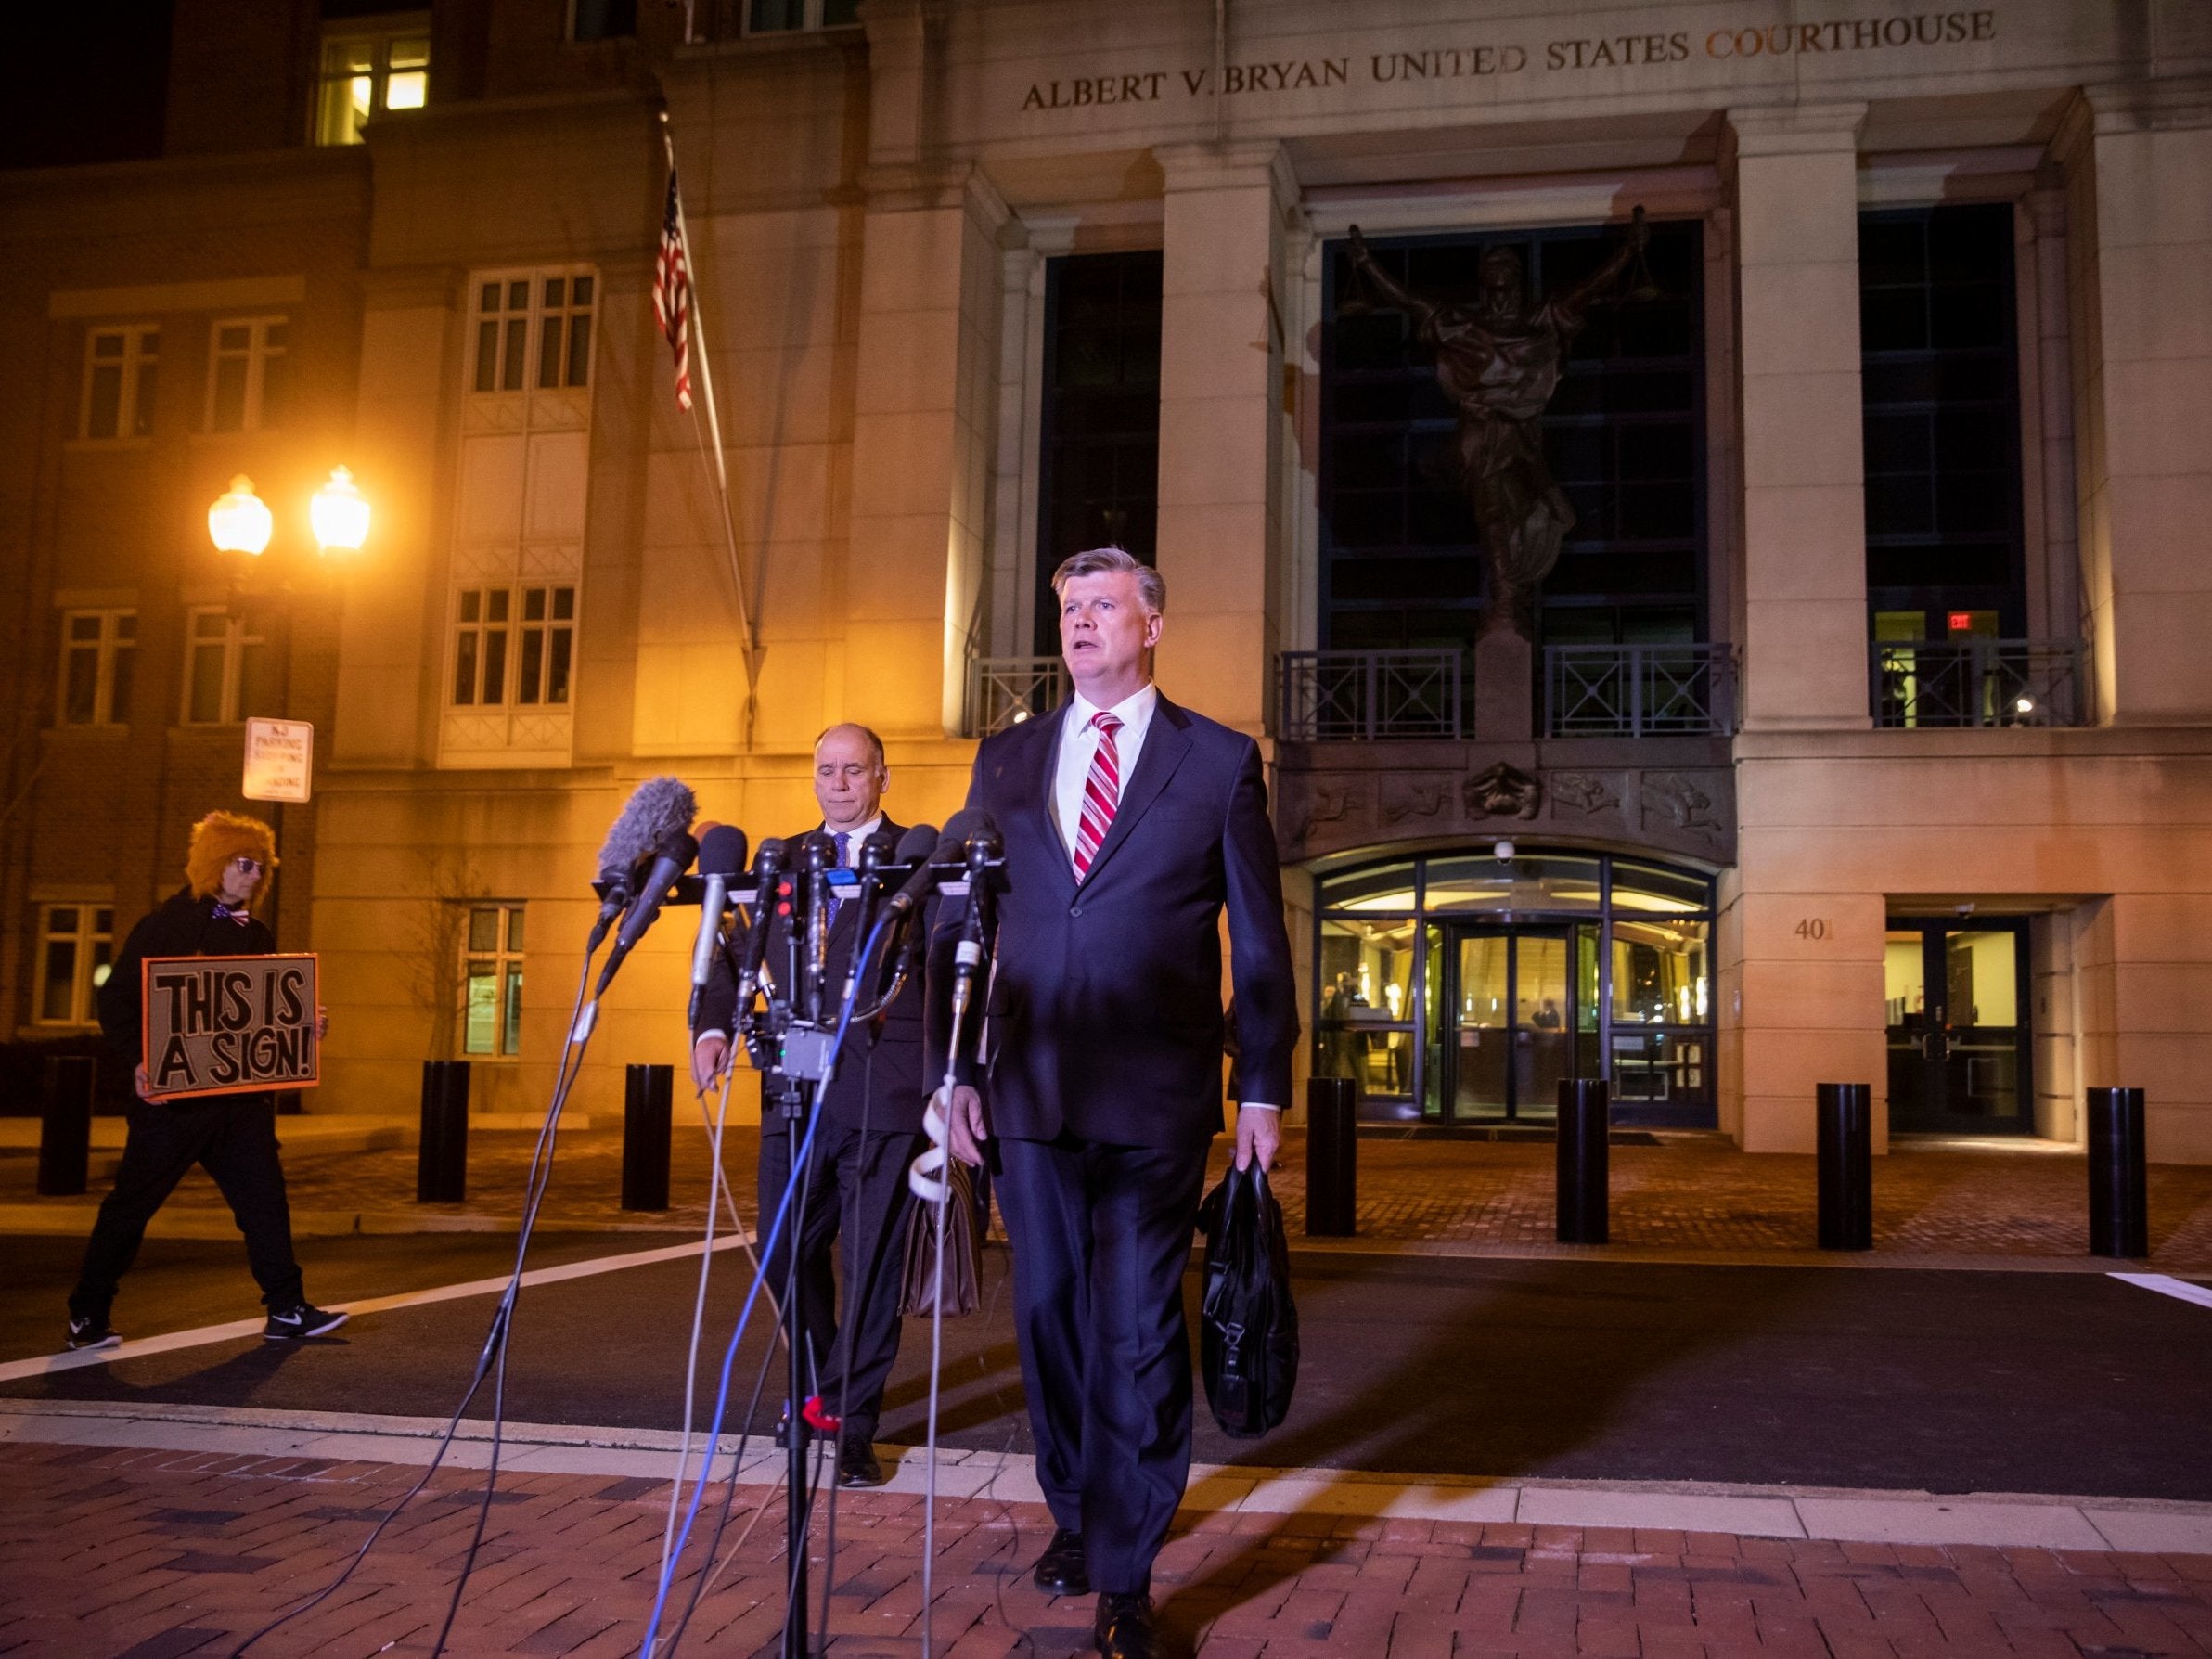 Paul Manafort's defense attorneys Kevin Downing (R) and Thomas Zehnle (L), briefly speak to the news media outside US District Court after a sentencing hearing in Alexandria, Virginia, USA, 07 March 2019. Manafort, who remains in federal custody, was sentenced to 47 months for defrauding banks and the government and failing to pay taxes on millions of dollars in income.